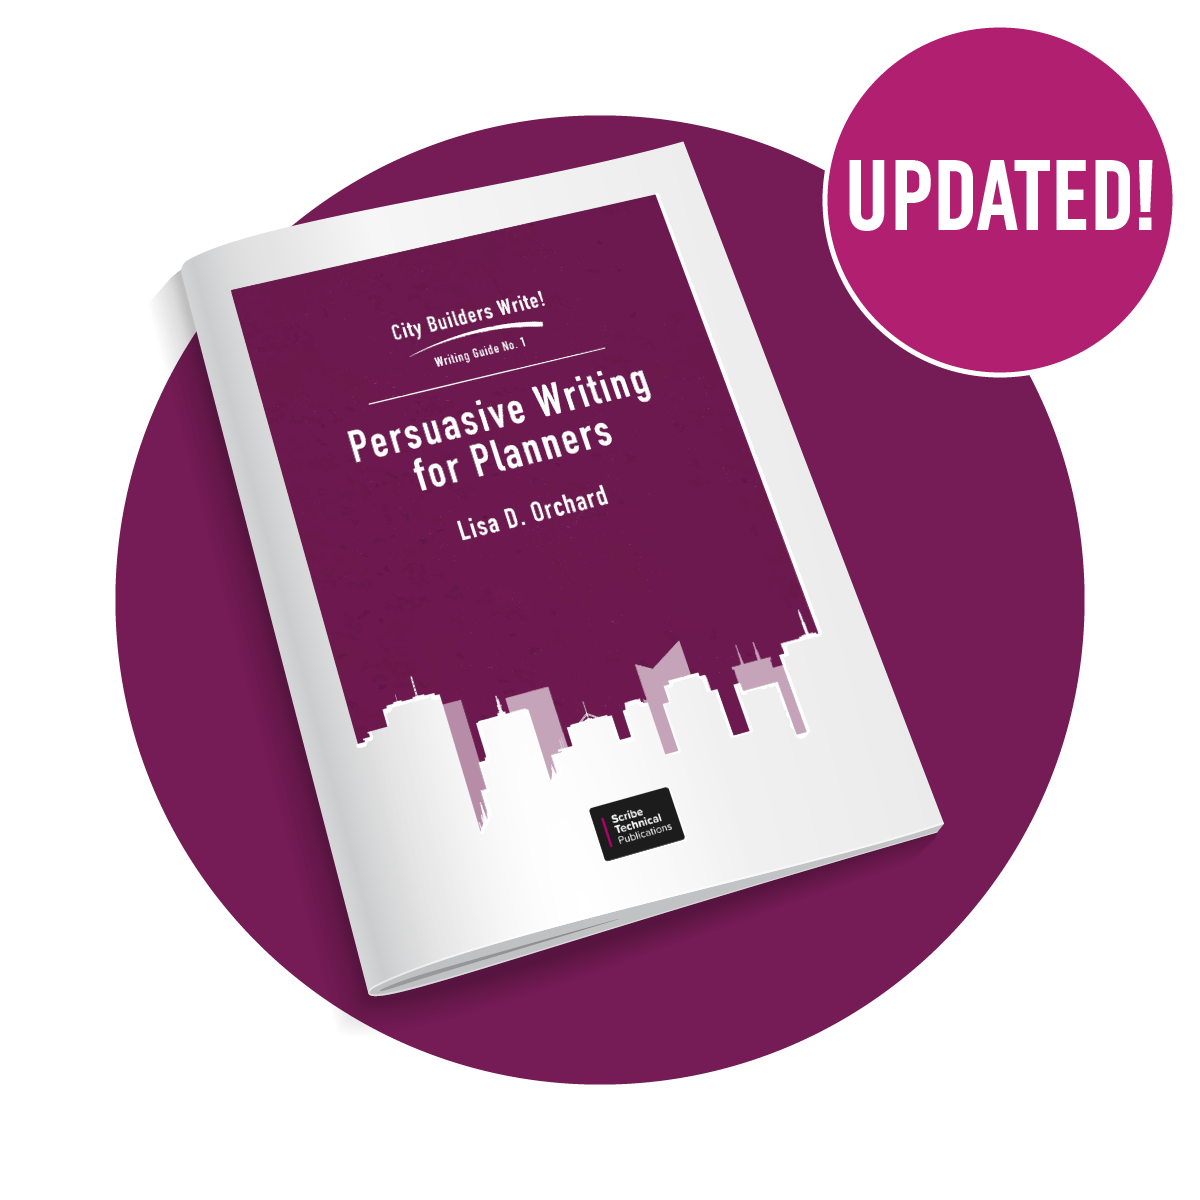 The cover page of Persuasive Writing for Planners.